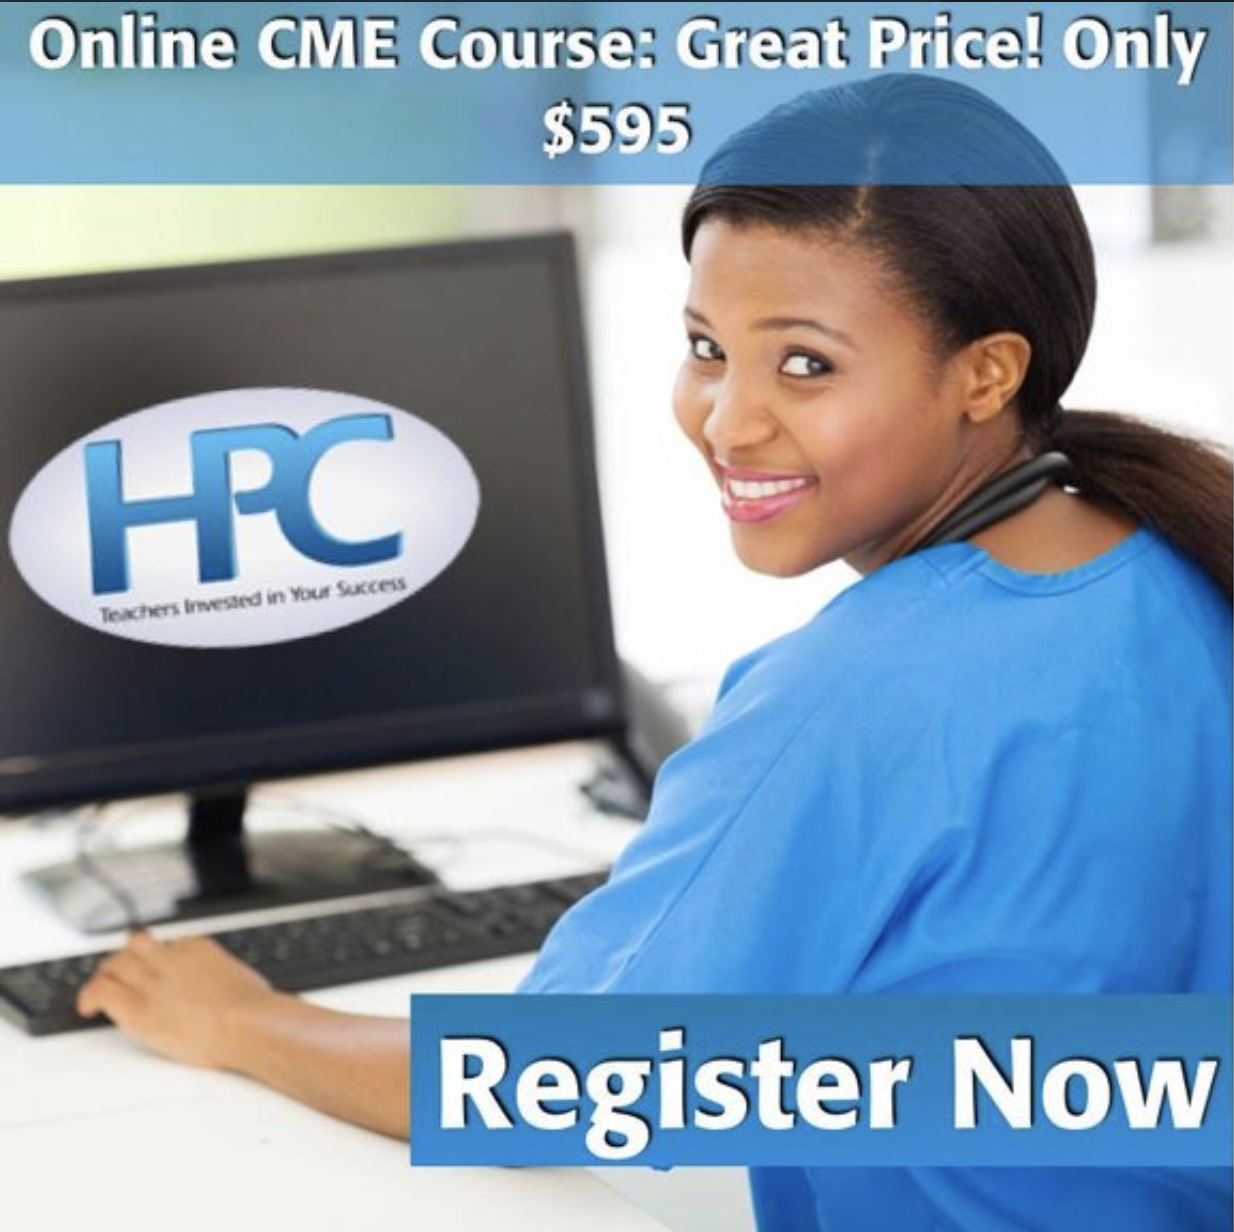 http://www.hospitalprocedures.org/store/hospitalist-and-emergency-procedures-online-cme-course